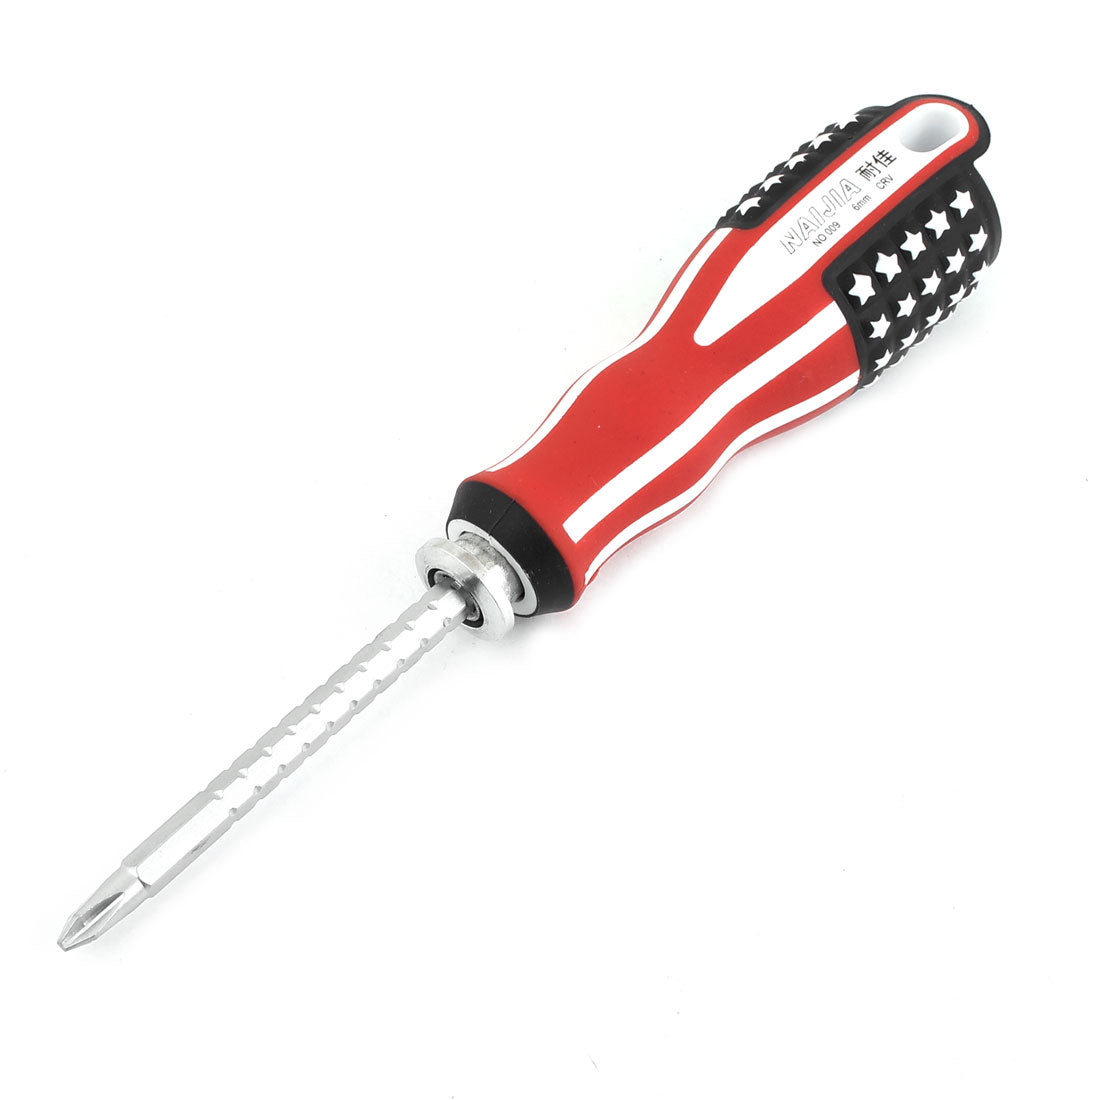 uxcell Uxcell Antislip Rubber Handle 6mm Dual Purpose Phillips Slotted Screwdriver